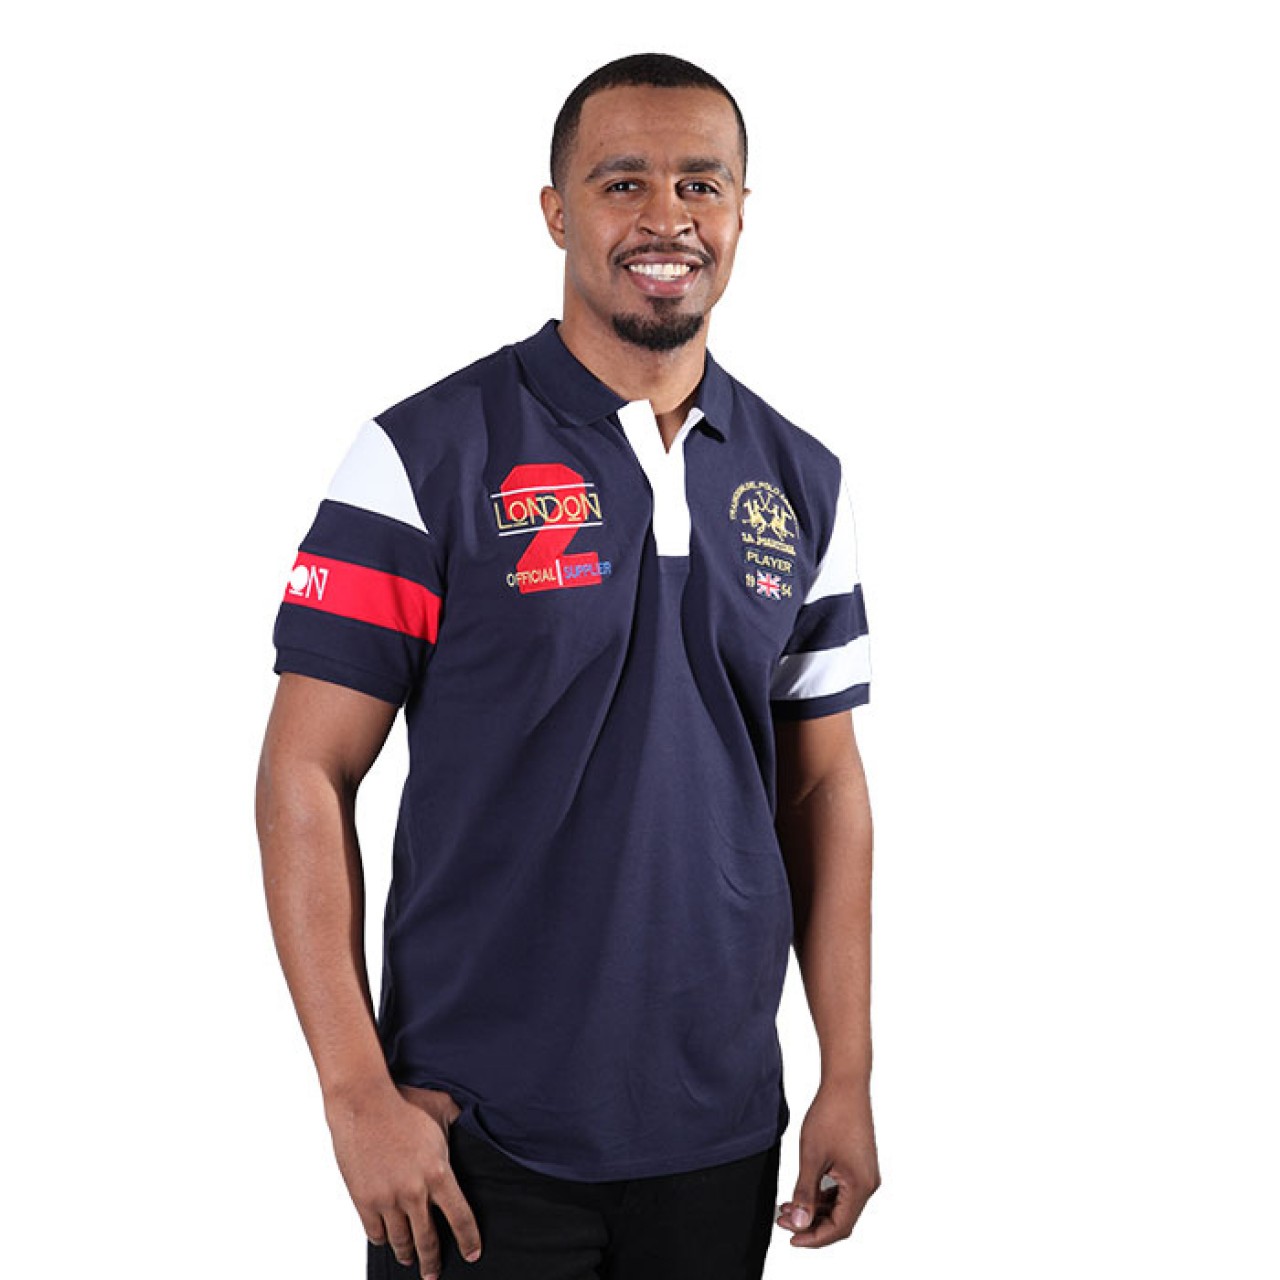 Mens Navy Blue Short Sleeve Shirts Collared Design Polo Player Outfit